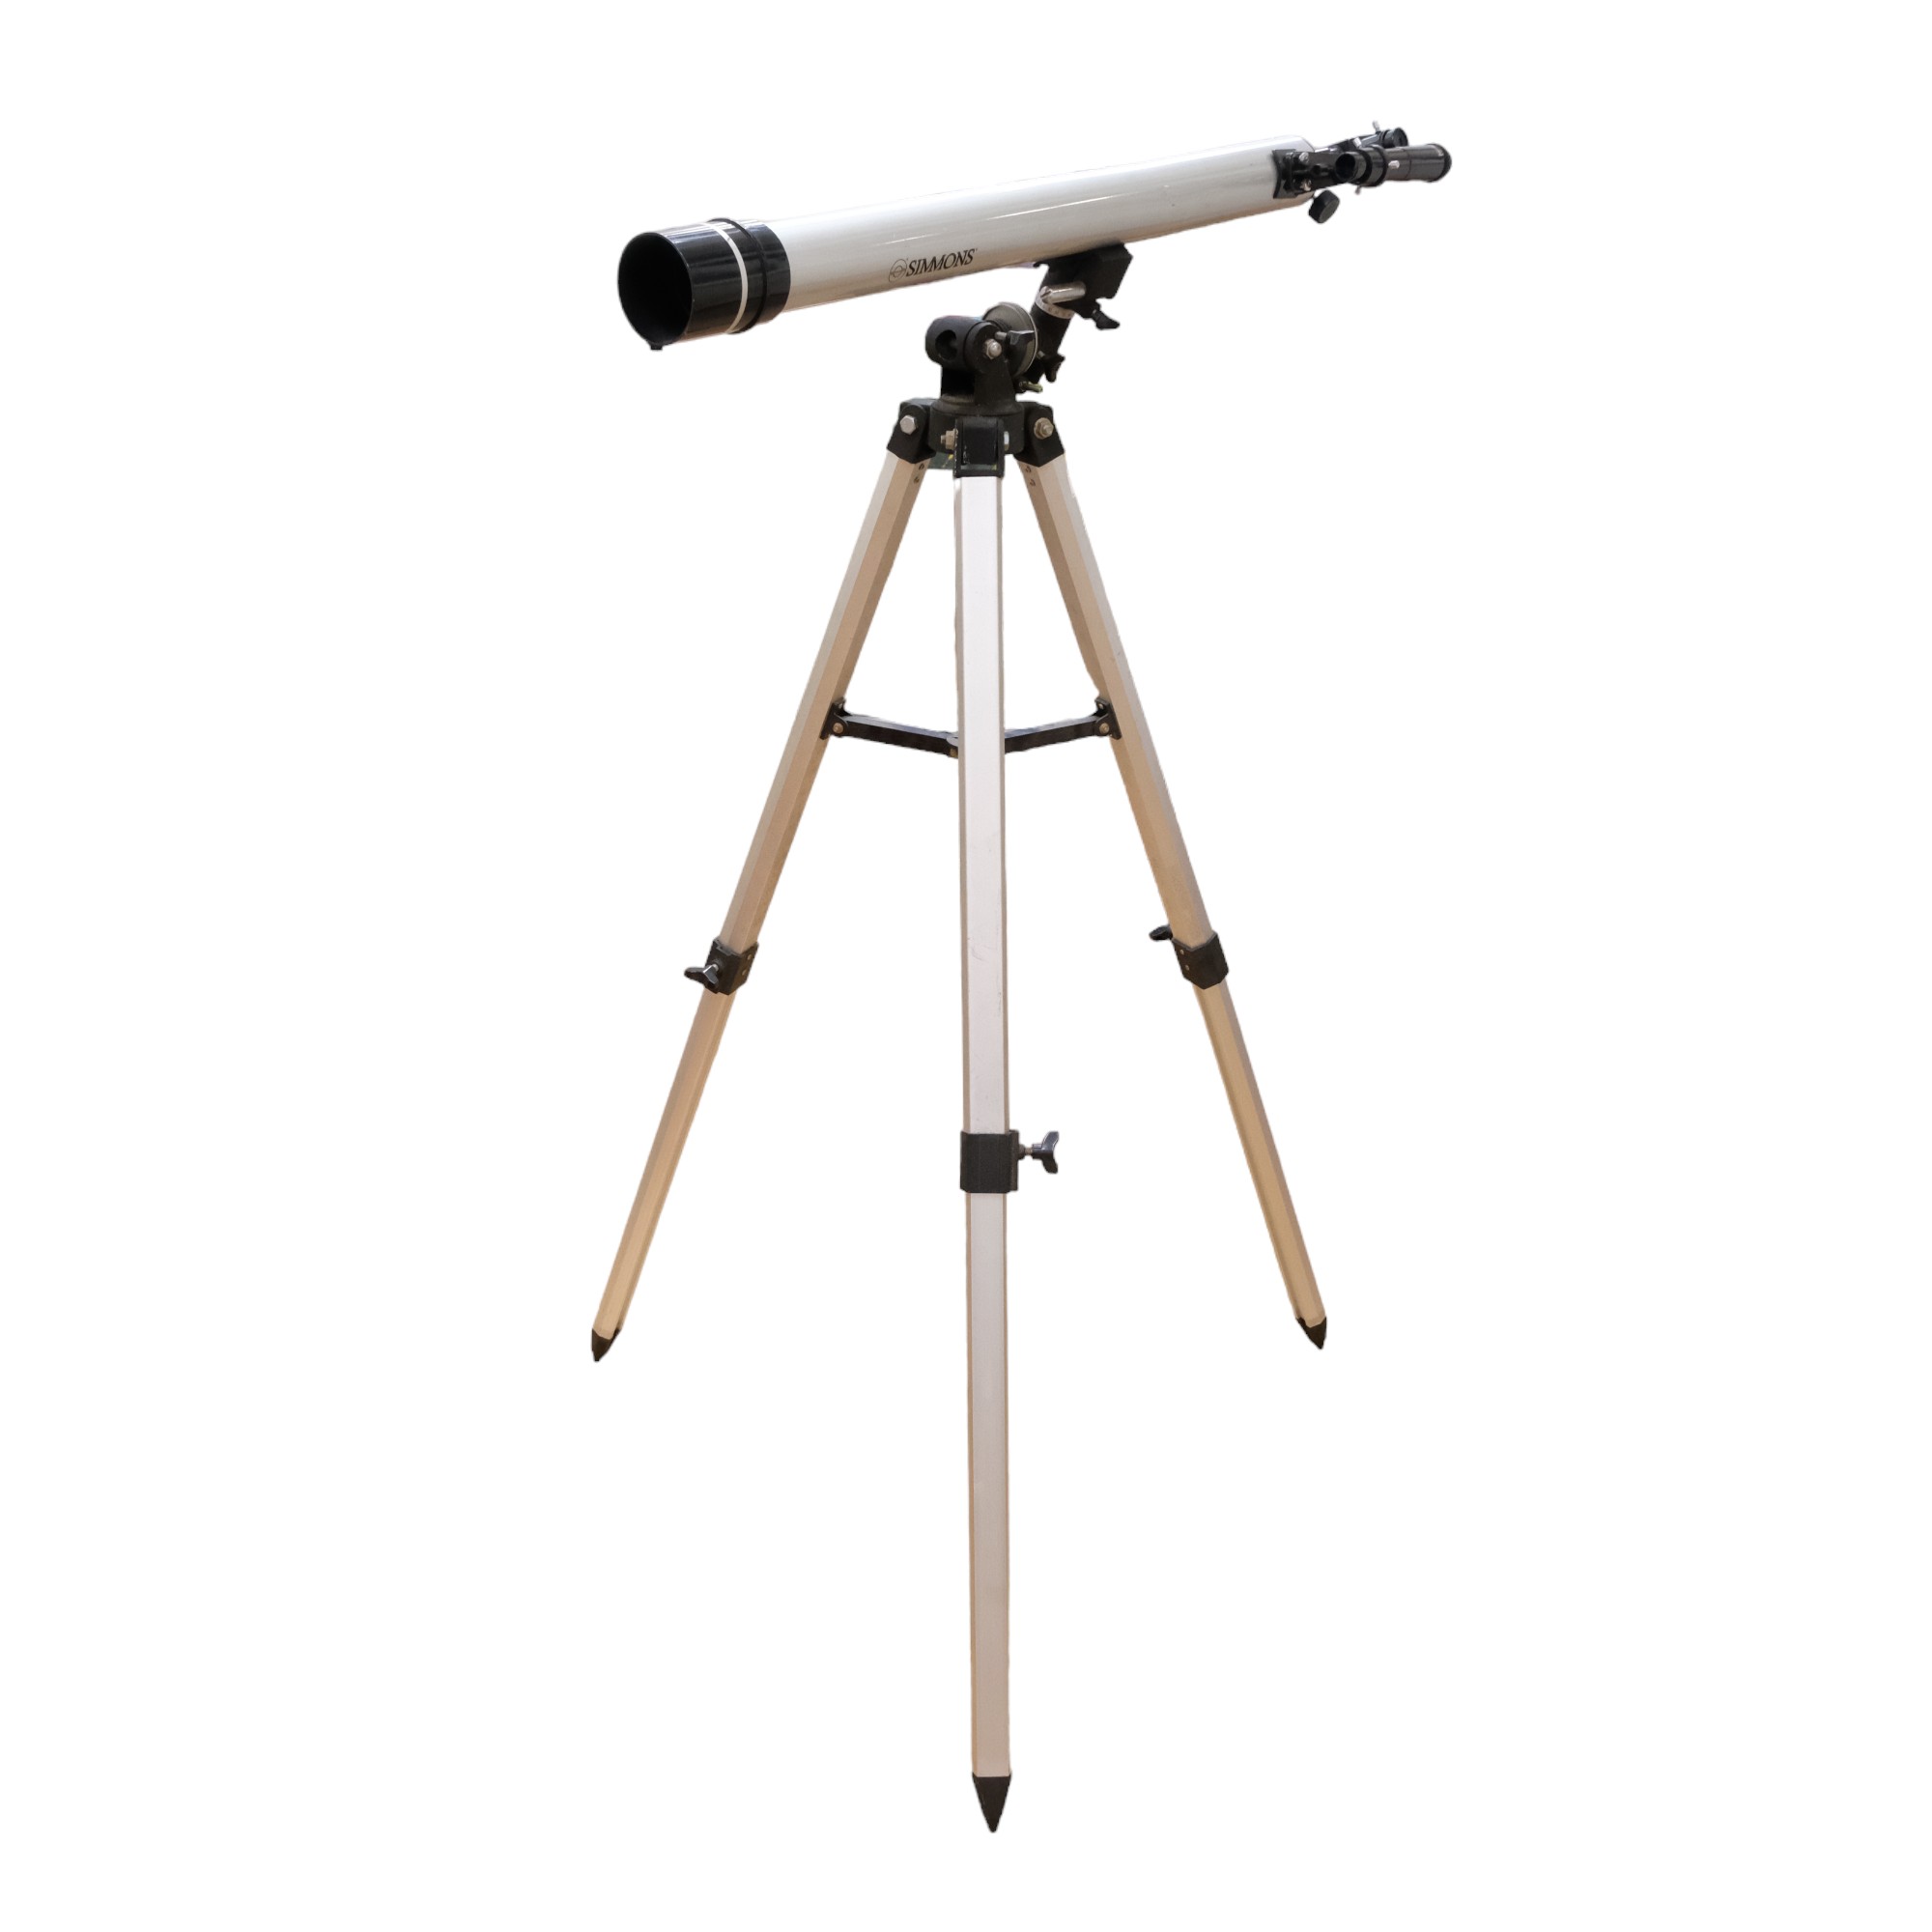 A Simmons telescope, with star spotter, equatorial mount and tripod, scope 92 cm, (optics clear)